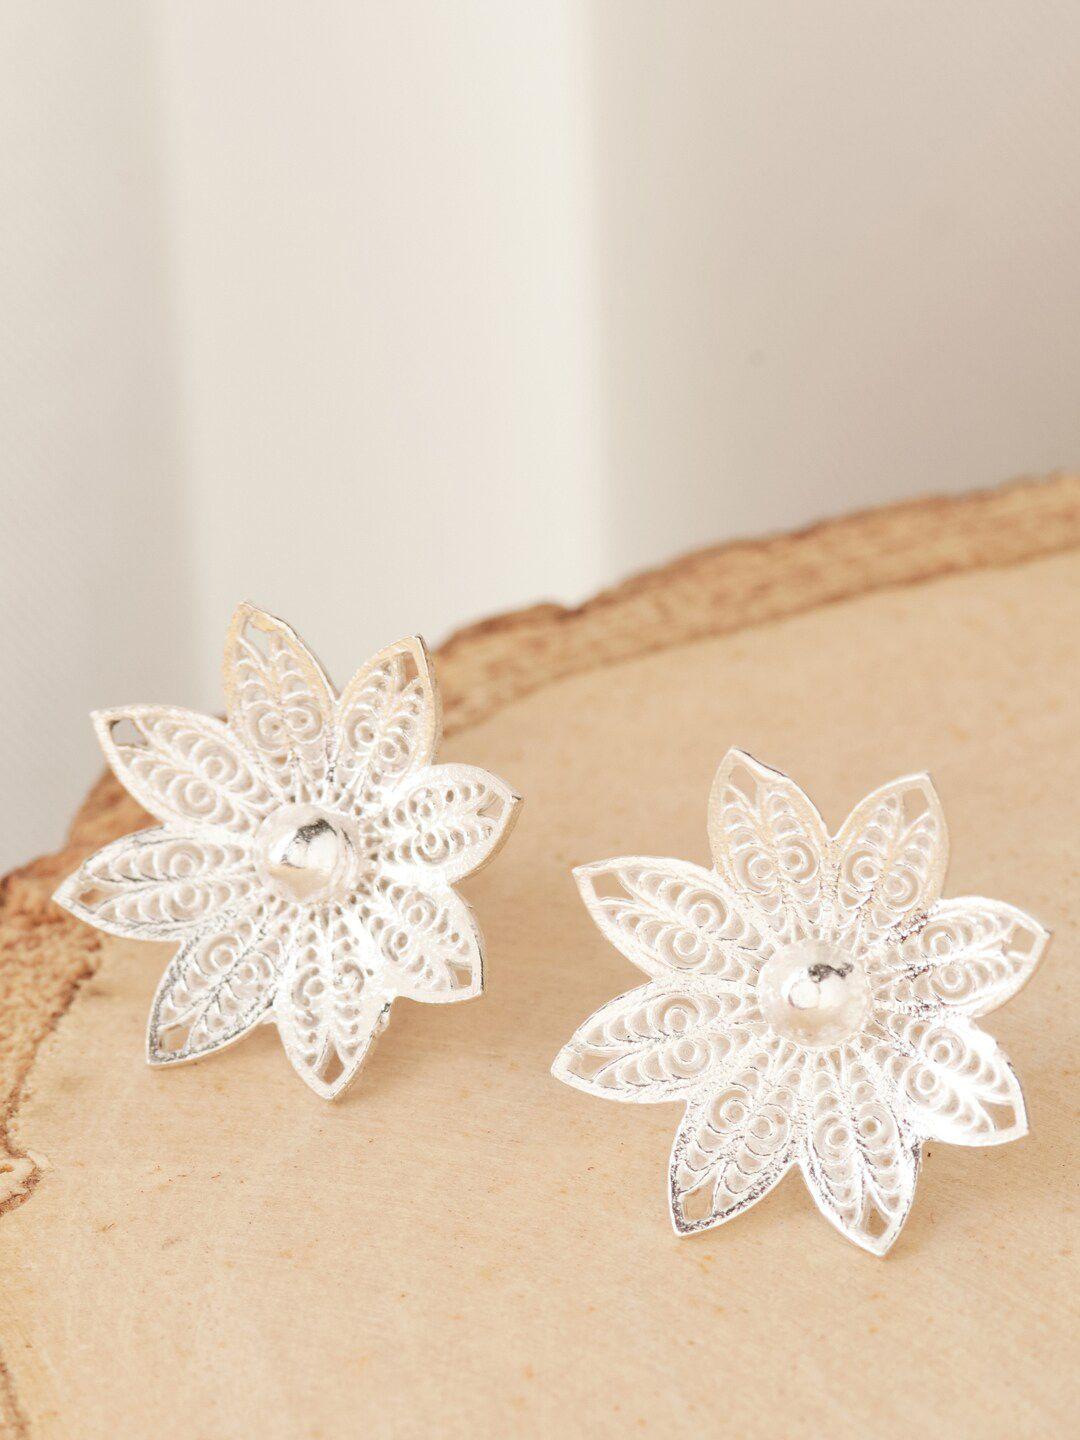 fabindia silver-plated floral studs earrings